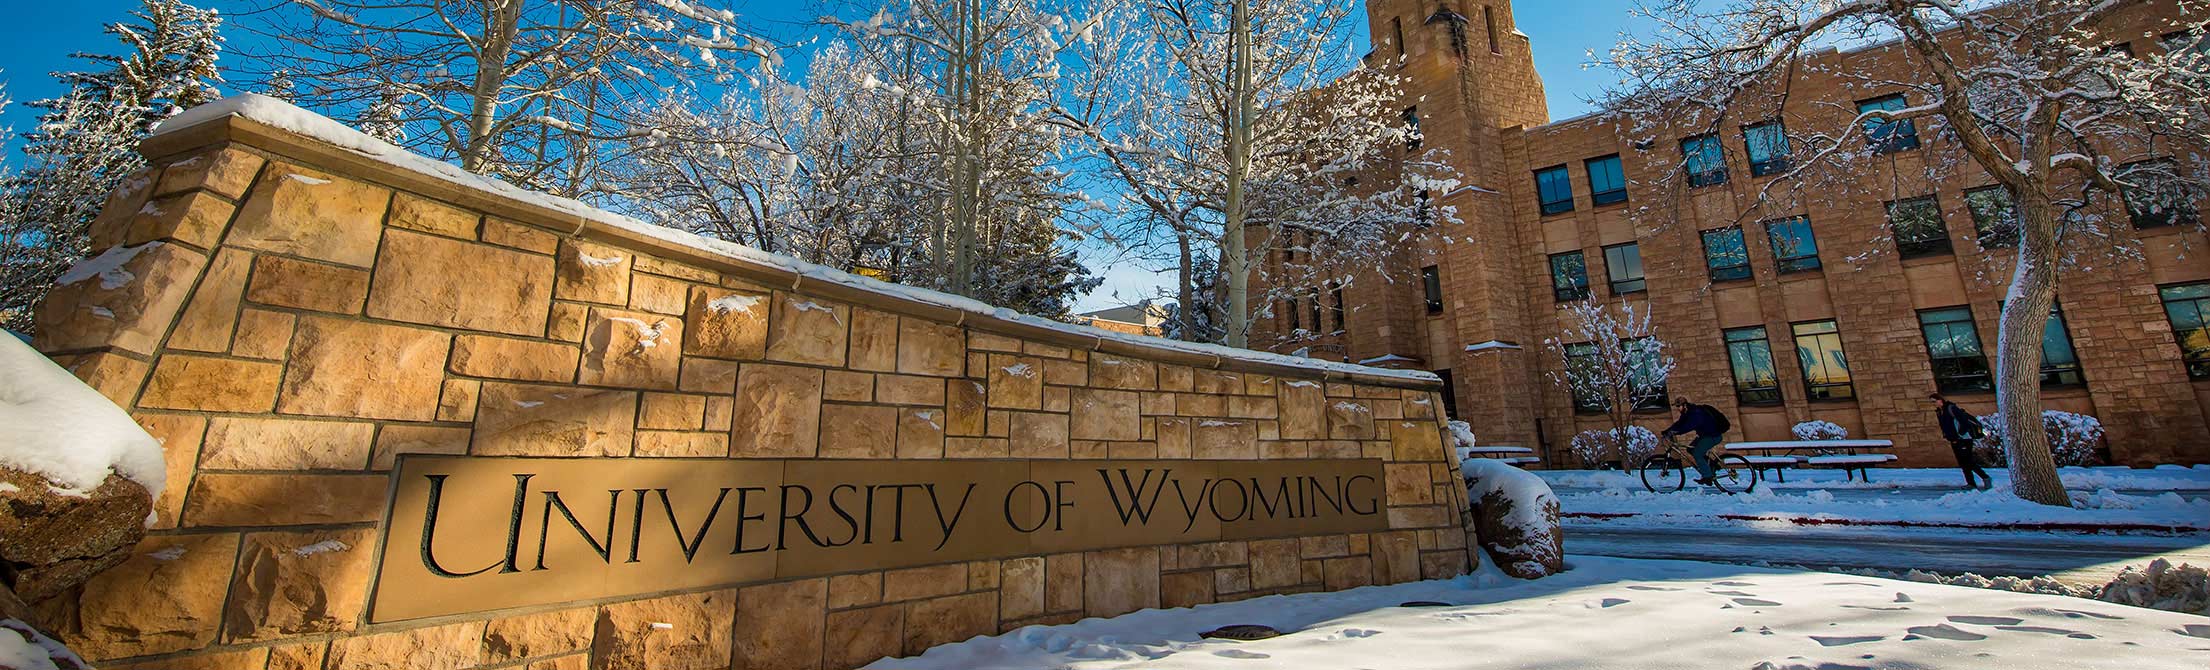 University of Wyoming stone sign near the Union, with snow on the ground